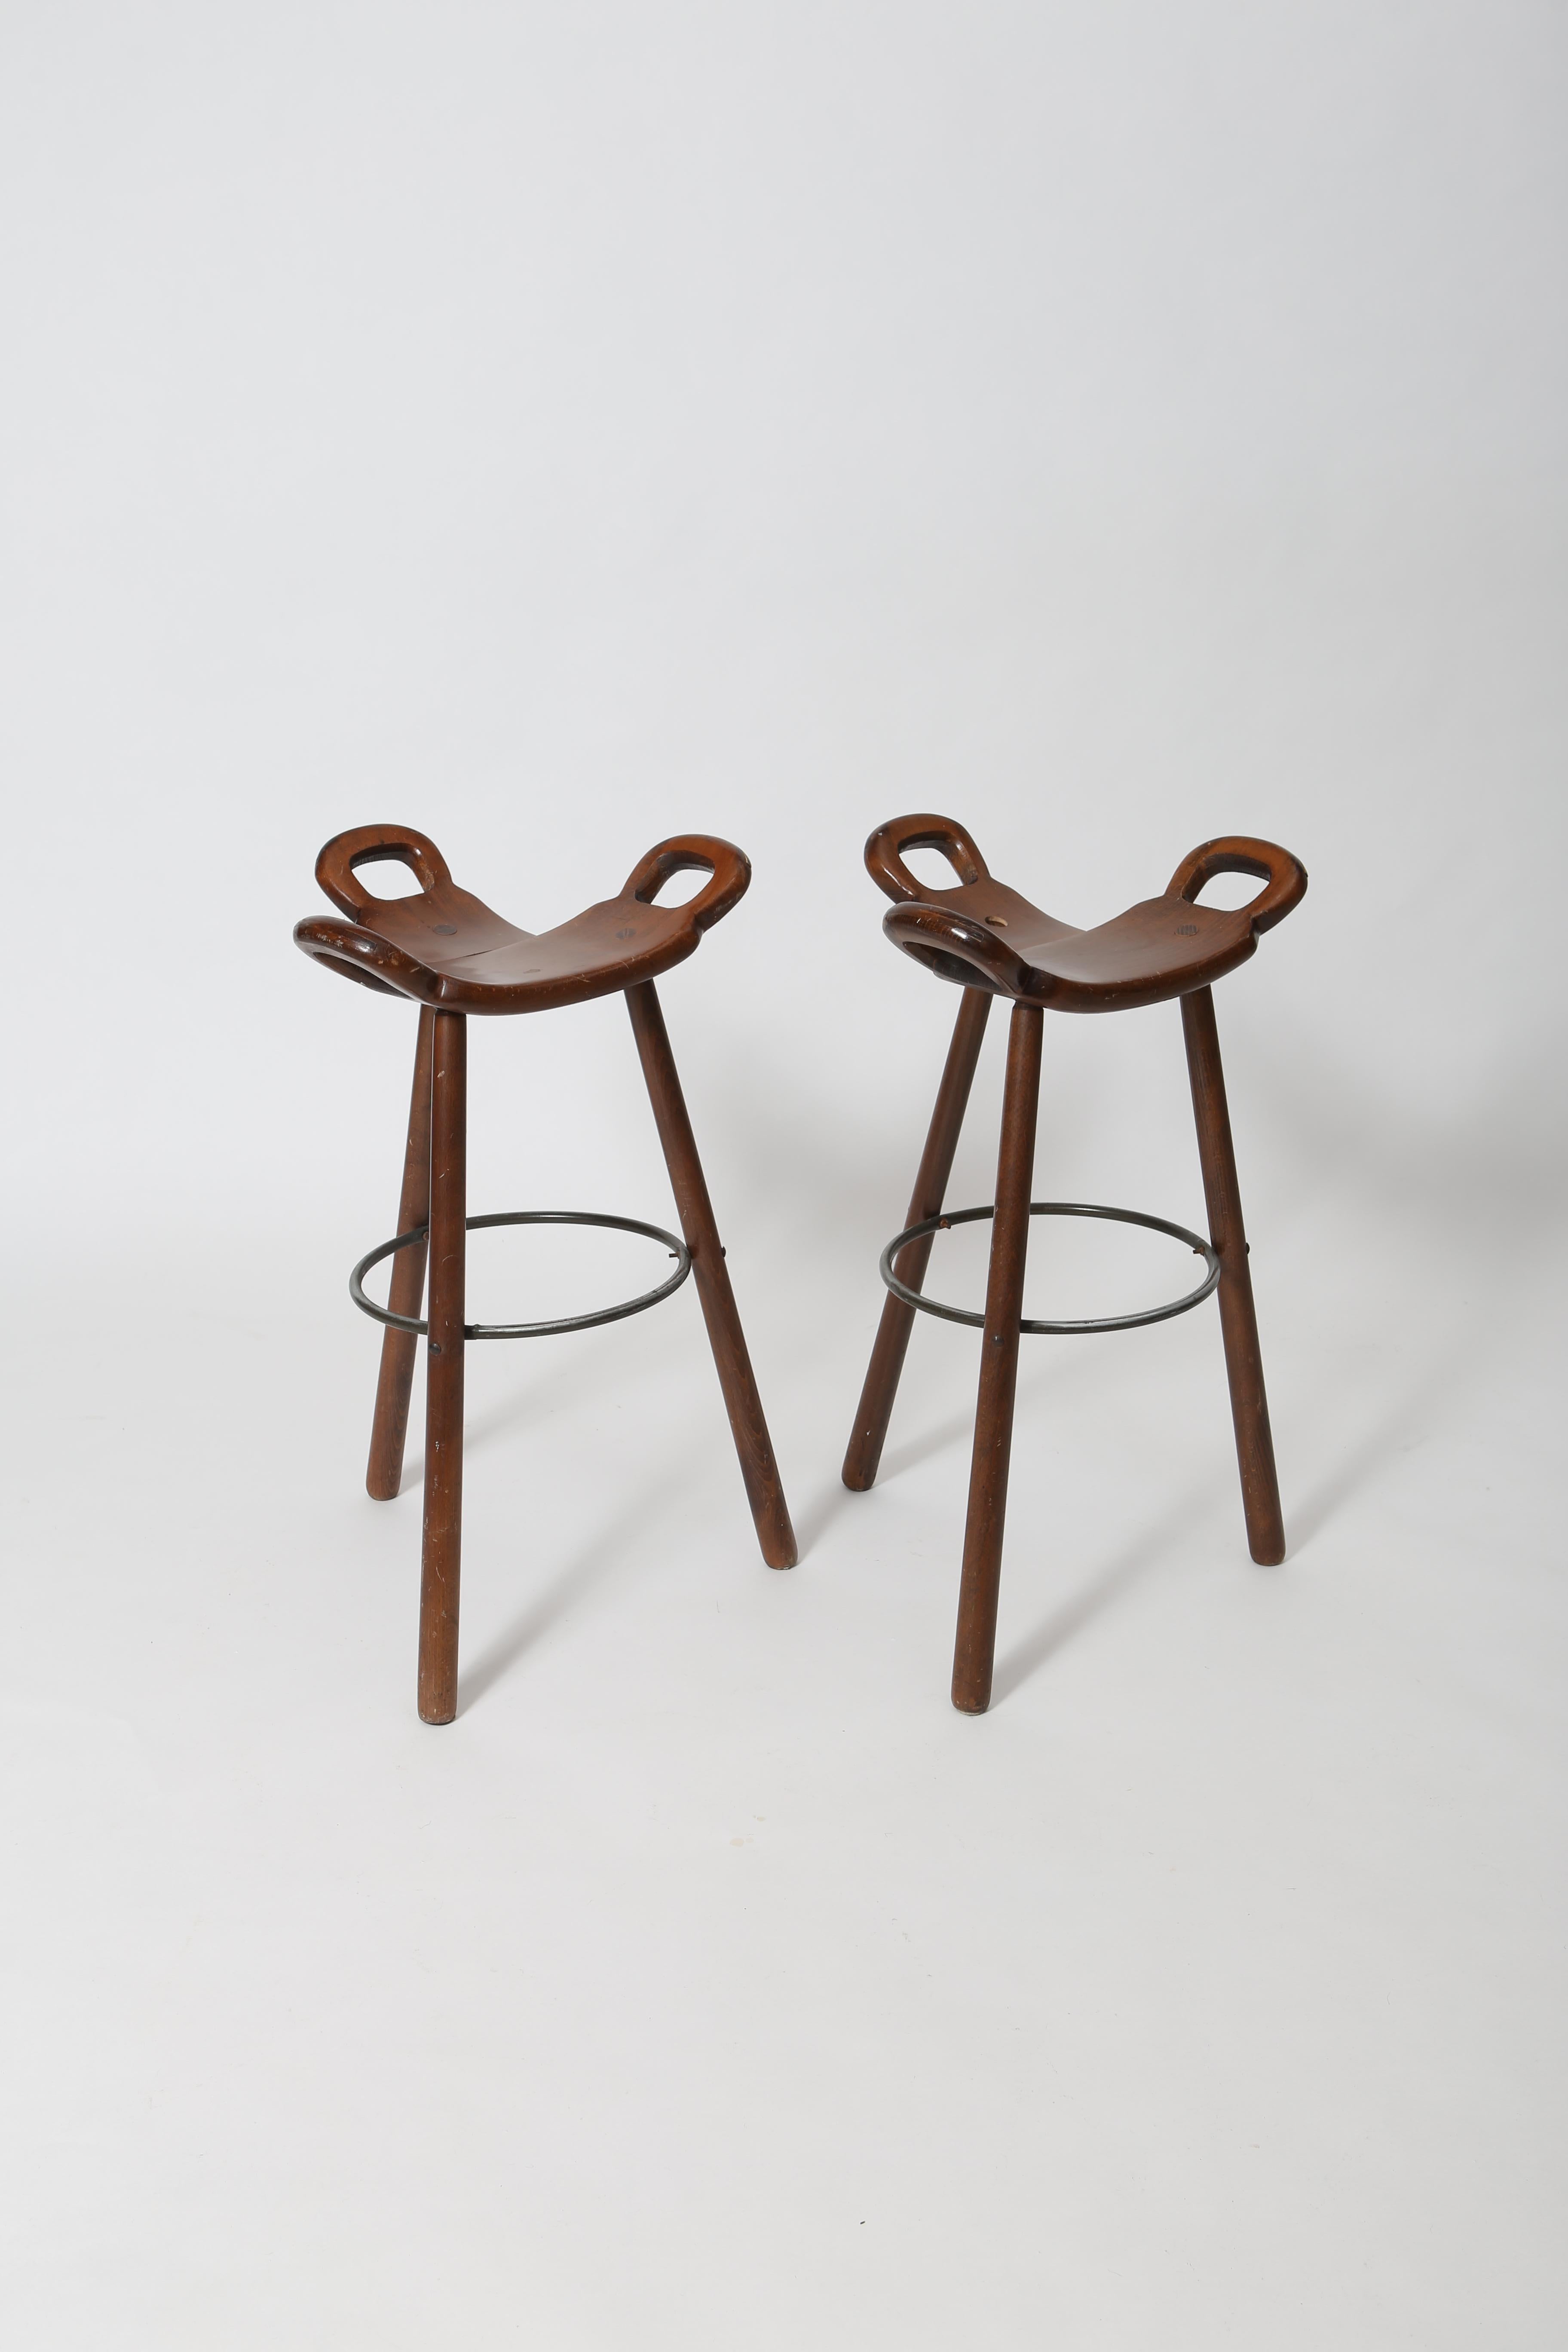 20th Century Spanish Midcentury Brutalist Barstools, a Pair For Sale